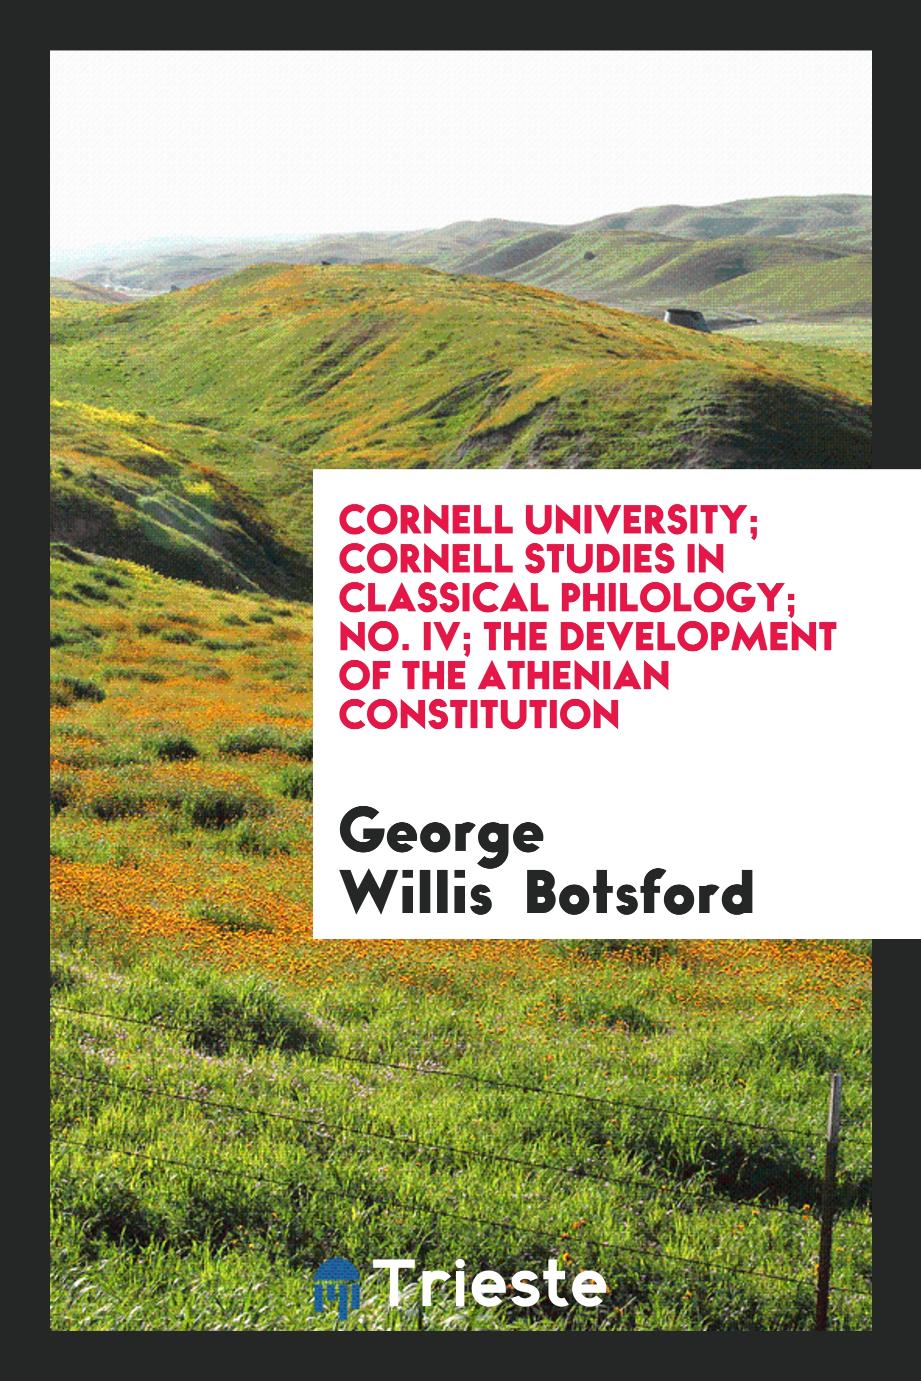 George Willis Botsford - Cornell University; Cornell Studies in Classical Philology; No. IV; The Development of the Athenian Constitution